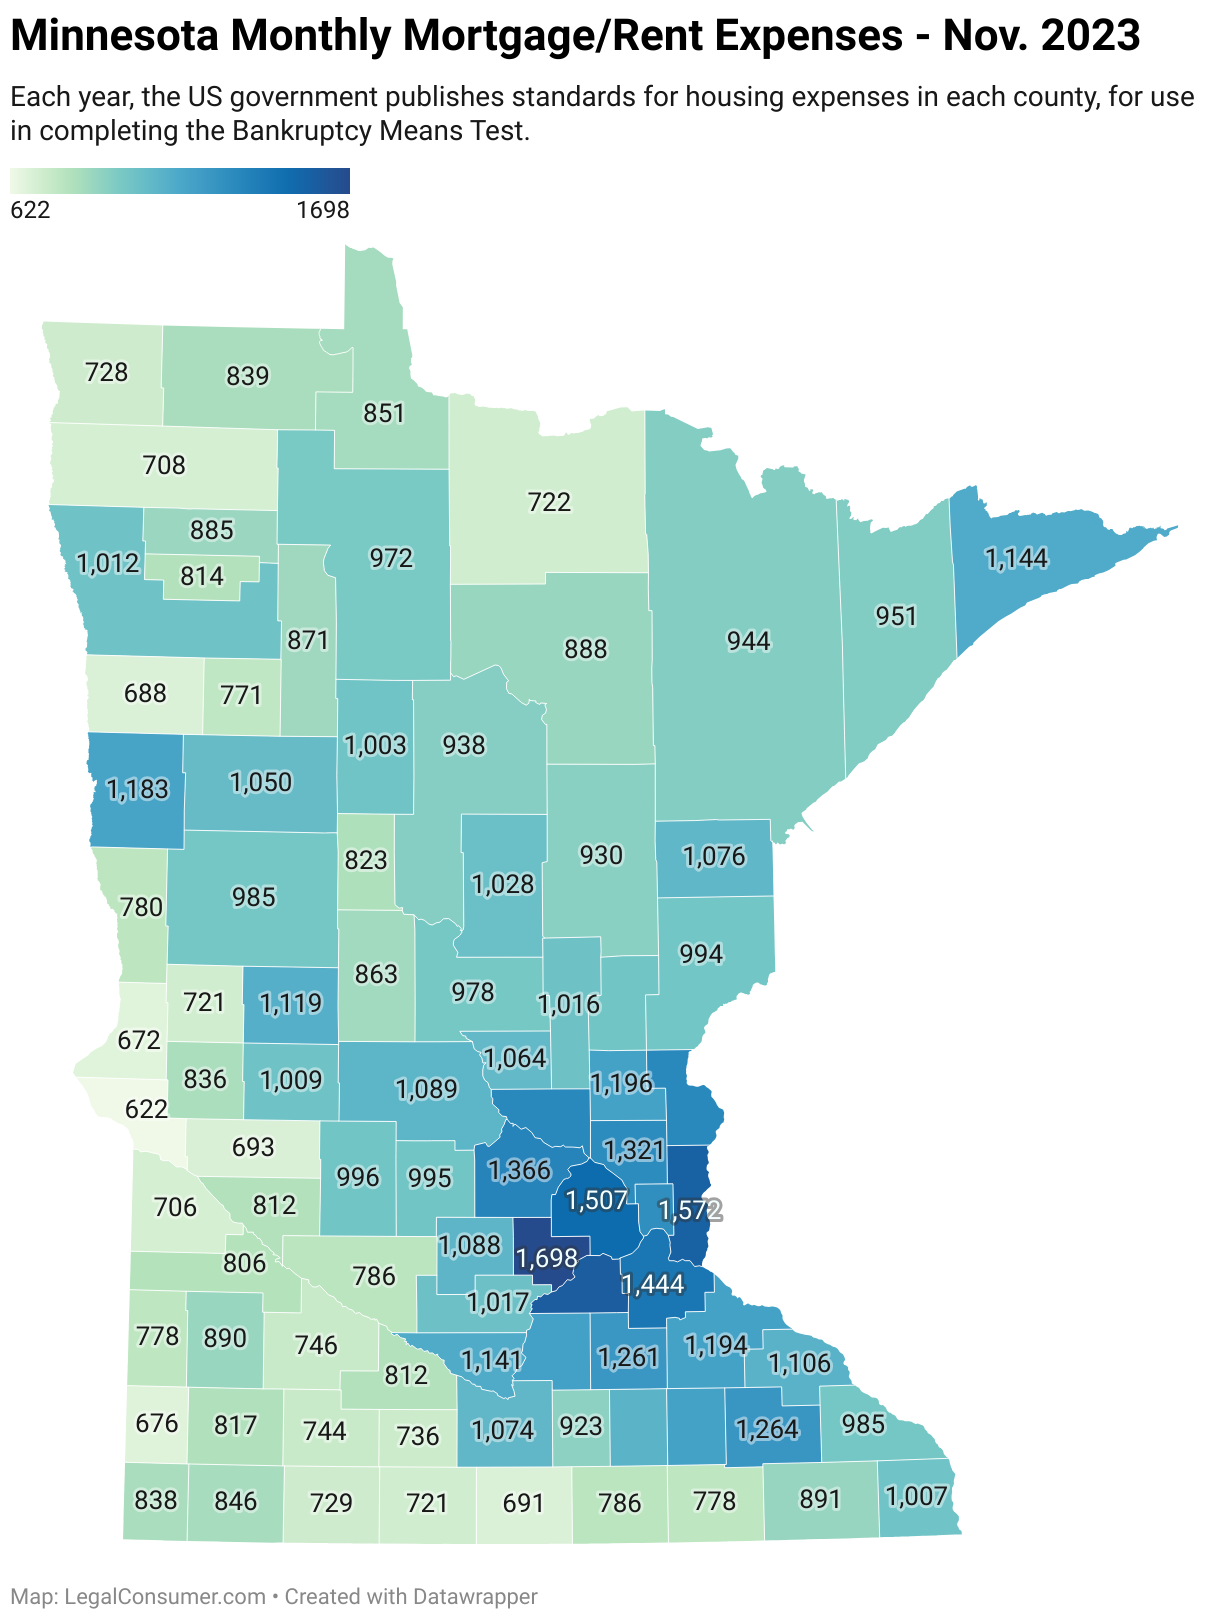 Map of Minnesota Housing Expenses for Bankruptcy Means Test